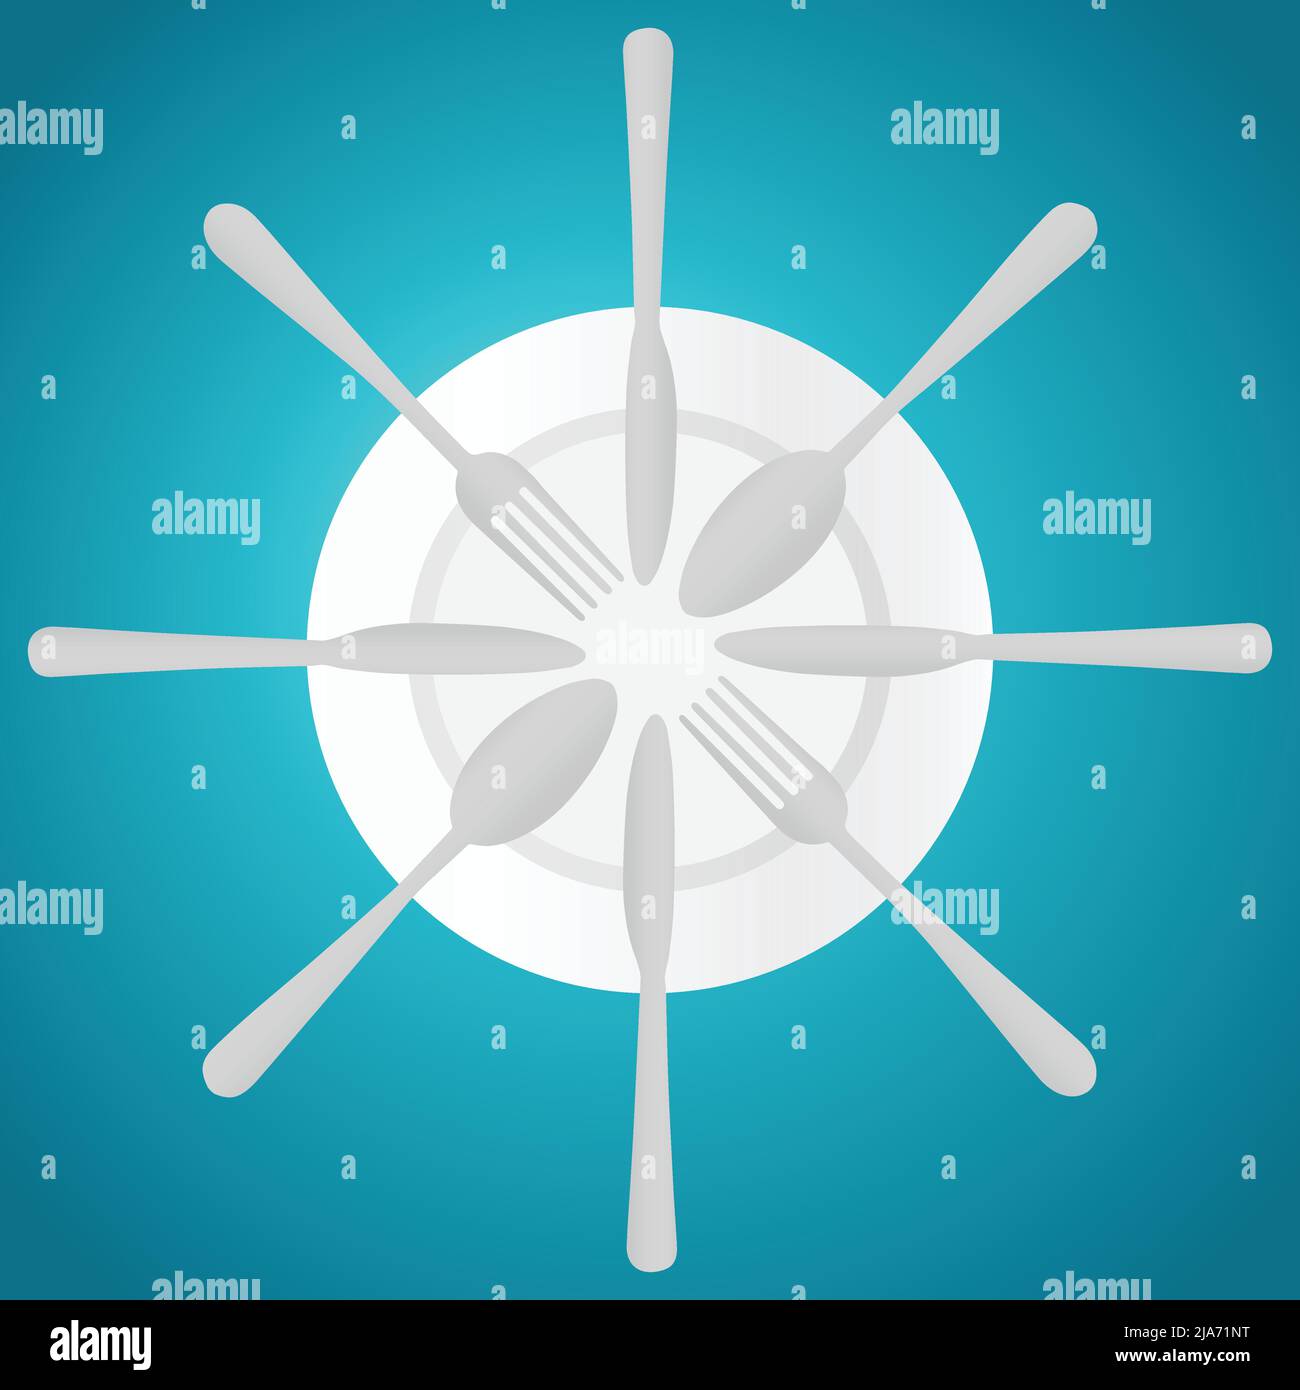 Empty plate with knifes, spoons and forks on it Stock Vector